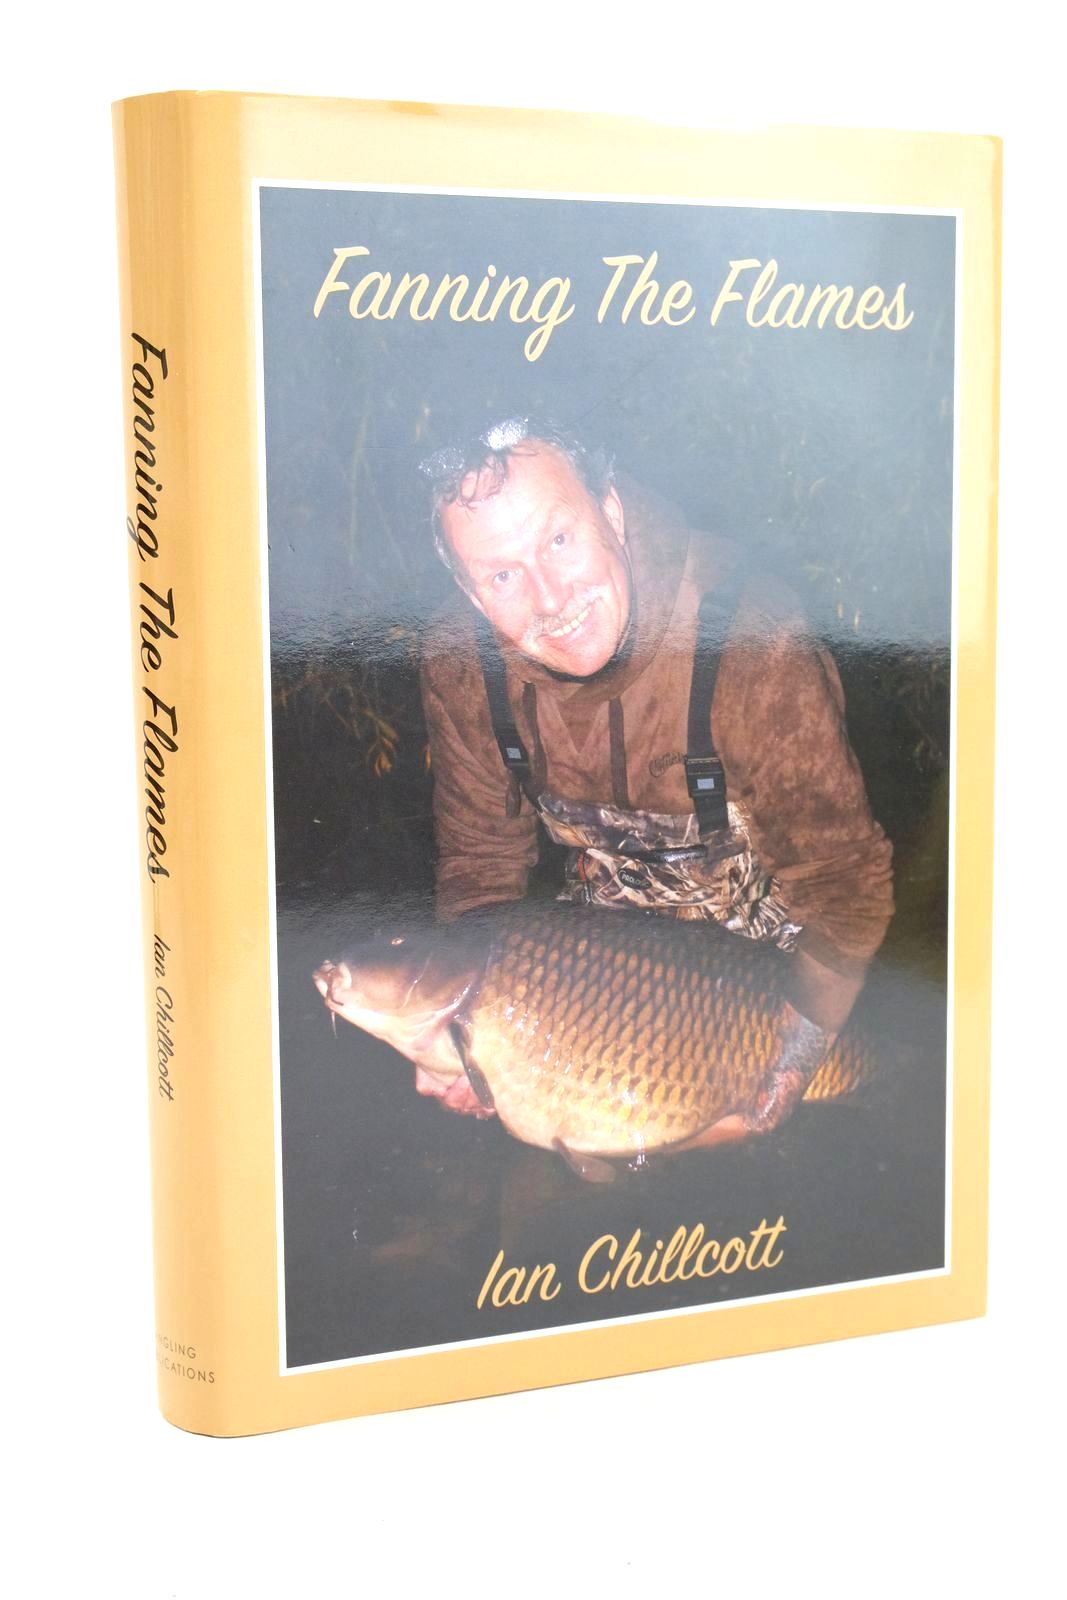 Photo of FANNING THE FLAMES written by Chillcott, Ian published by Angling Publications (STOCK CODE: 1327567)  for sale by Stella & Rose's Books